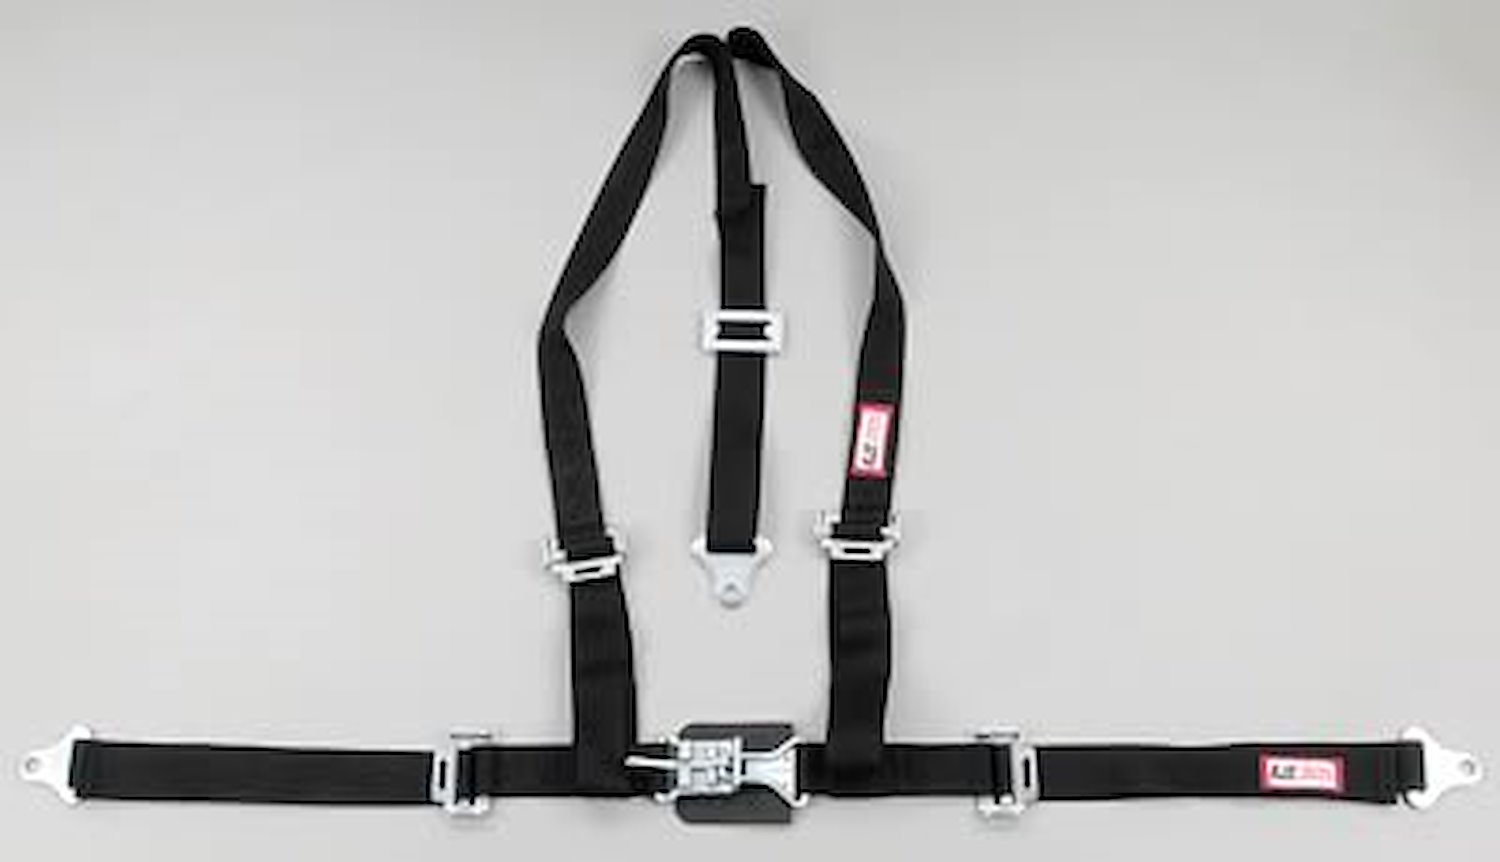 NON-SFI L&L HARNESS 3 PULL UP Lap Belt SNAP SEWN IN 2 S.H. Individual ROLL BAR Mount WRAP/BOLT RED